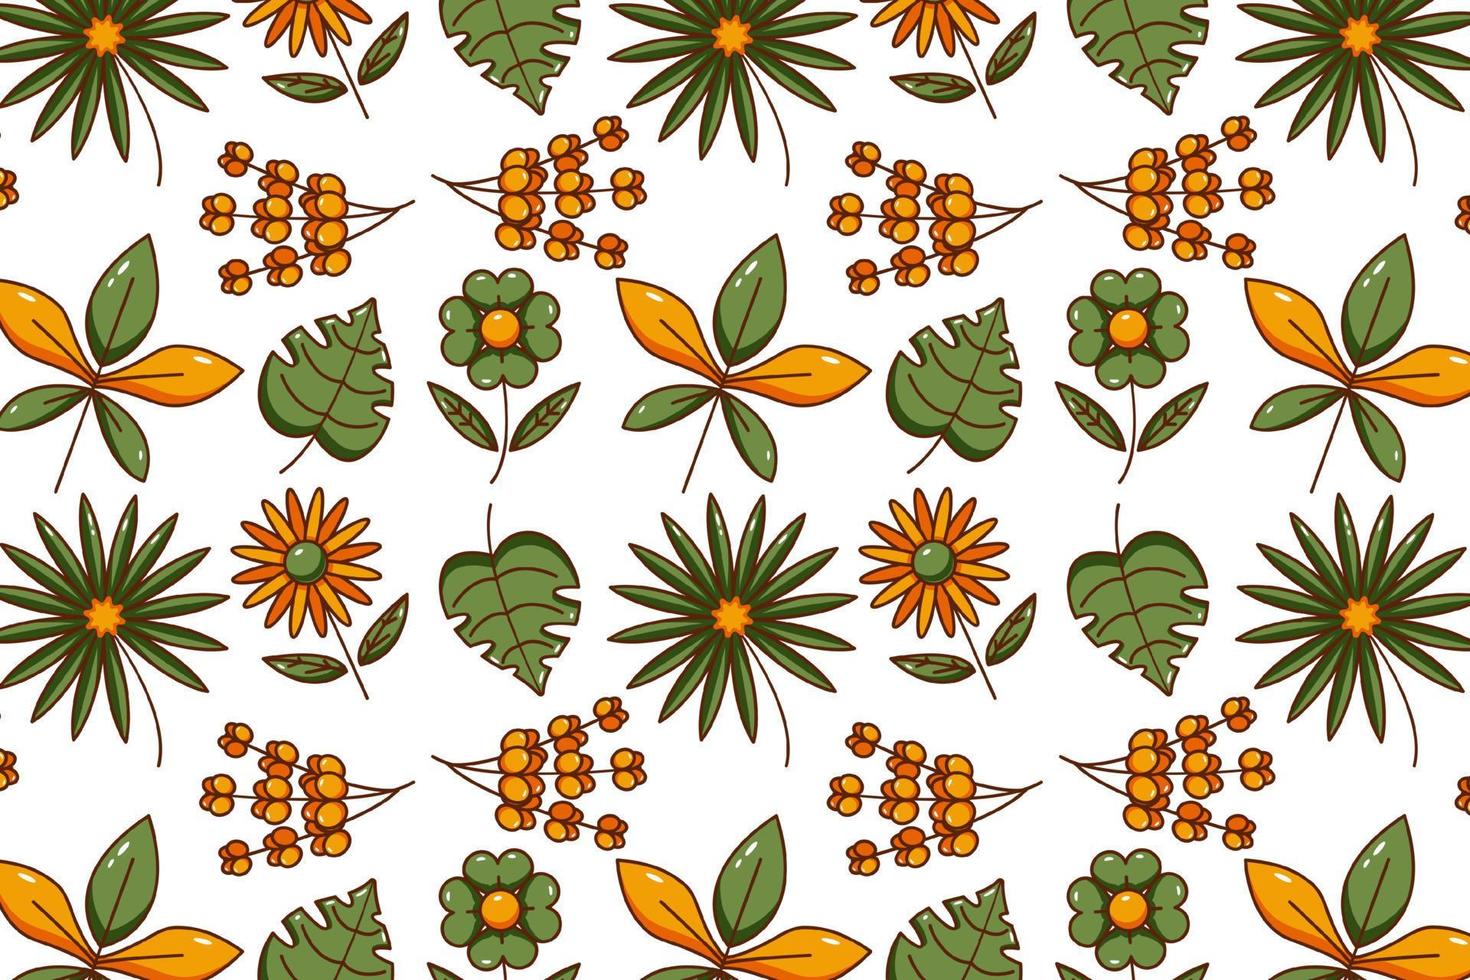 Flower and leaf icon pattern vector